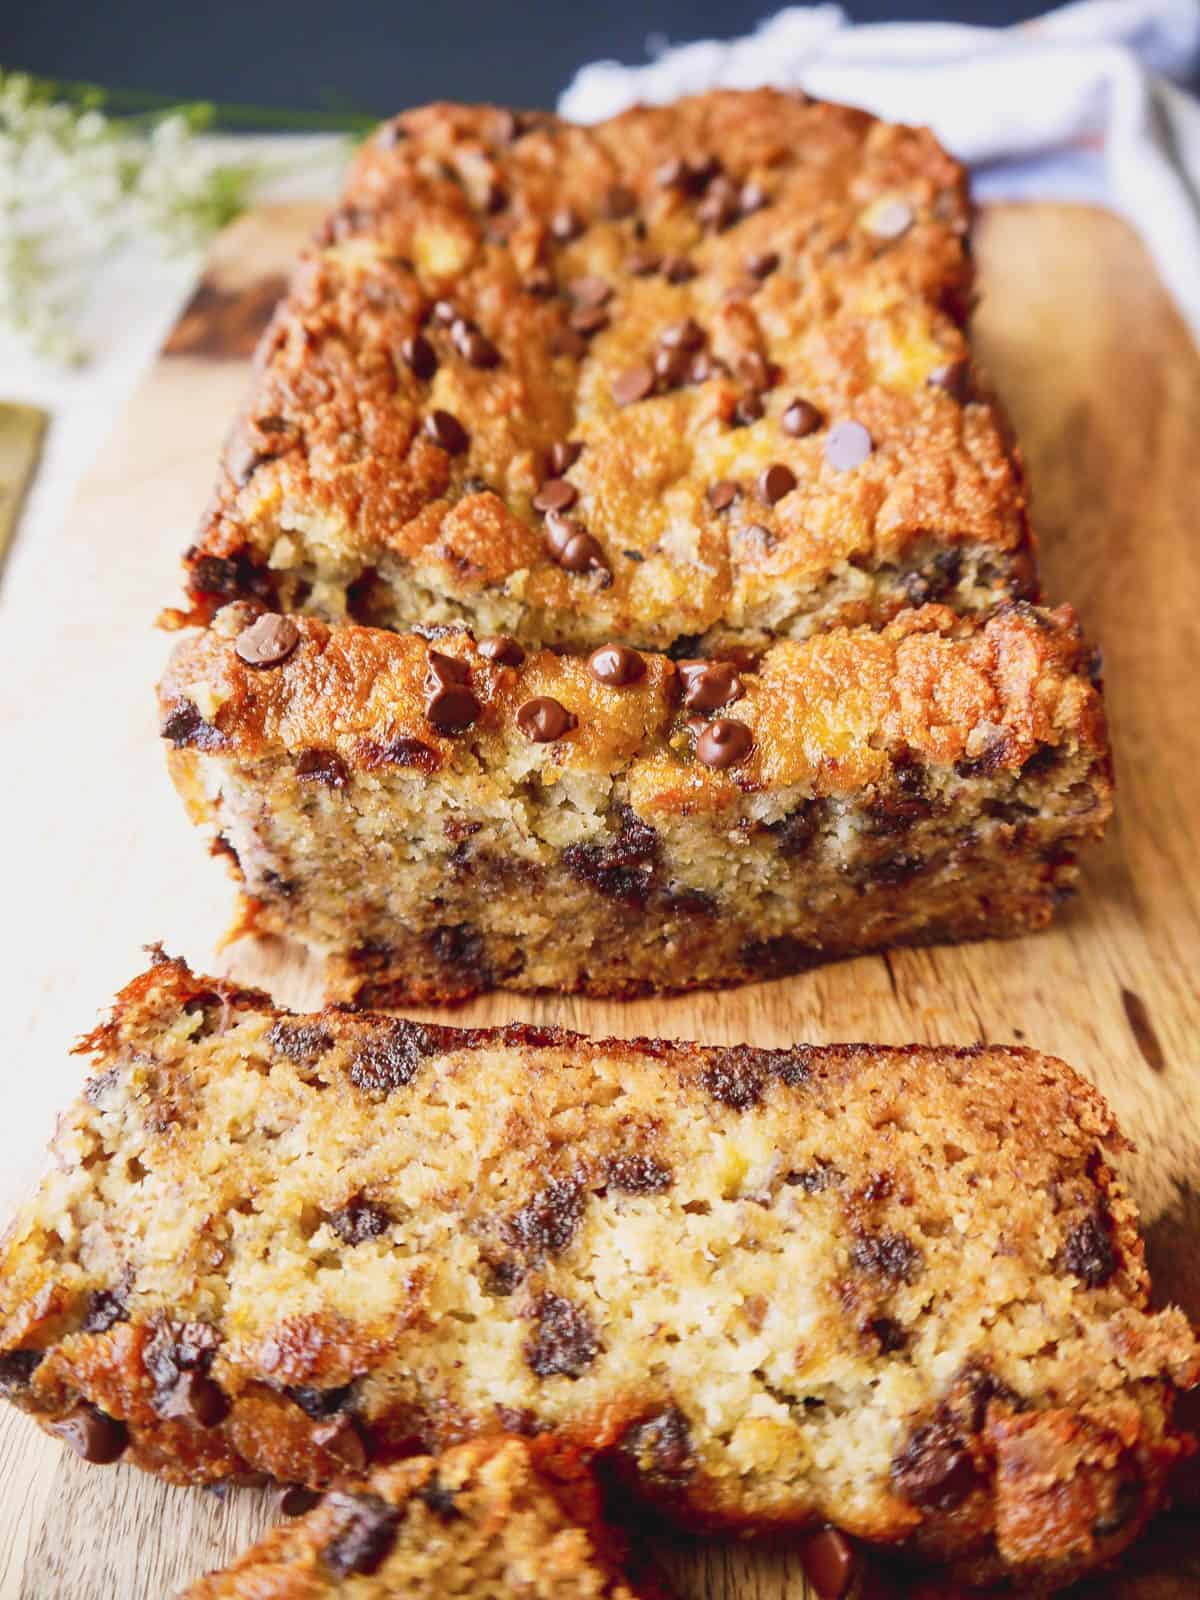 Dairy free chocolate chip banana bread that is sliced.